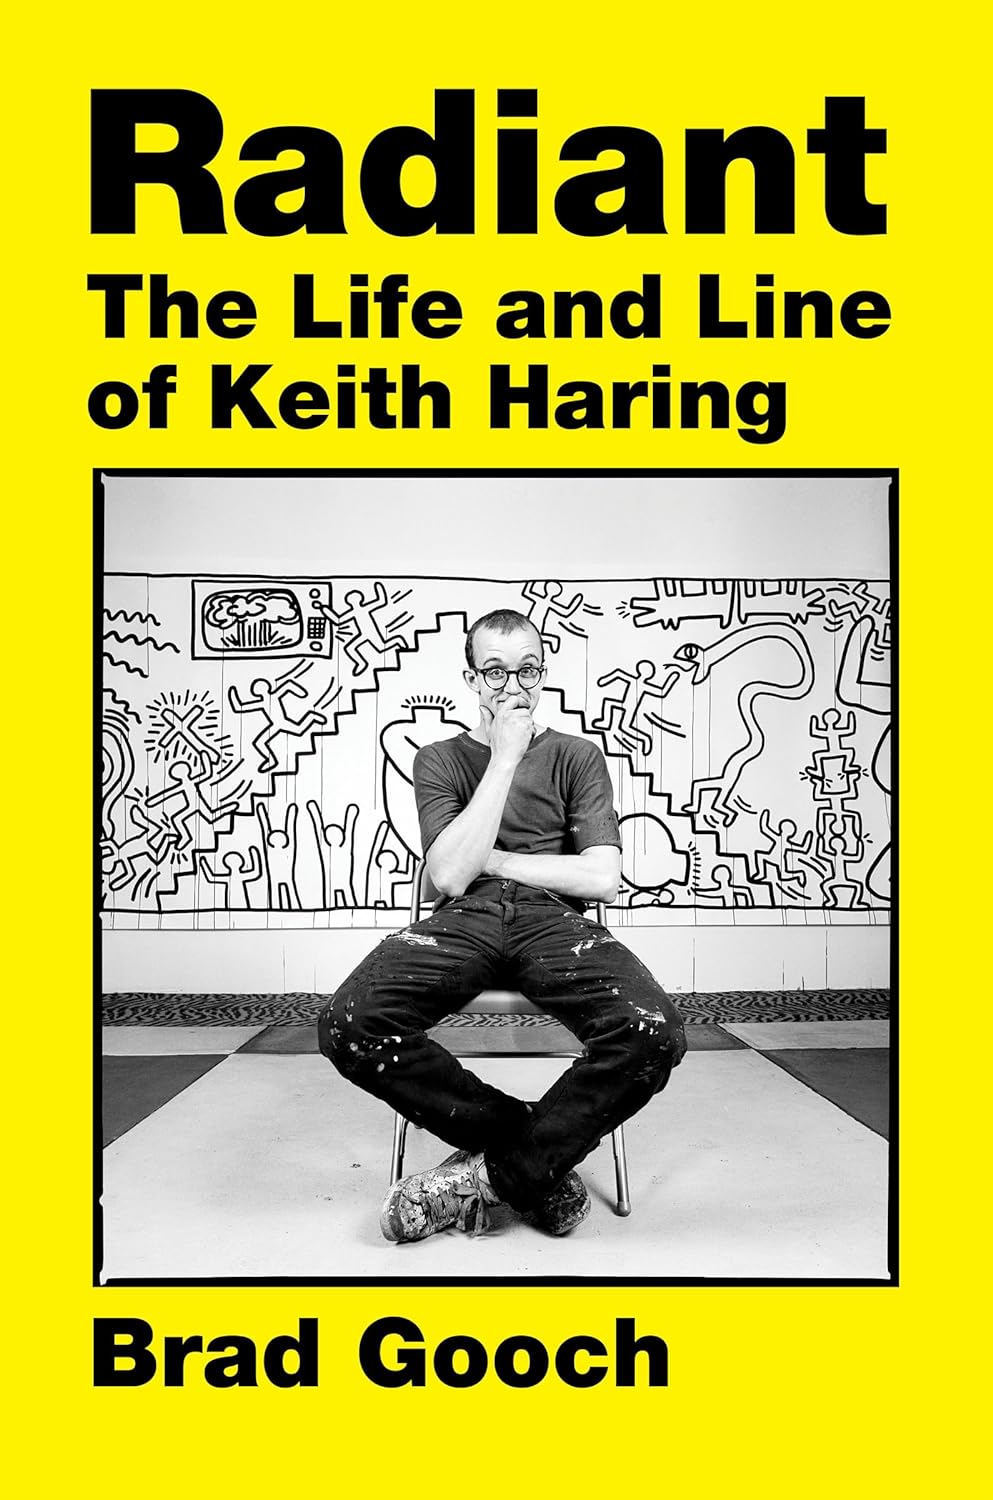 The cover of Radiant: The Life and Line of Keith Haring